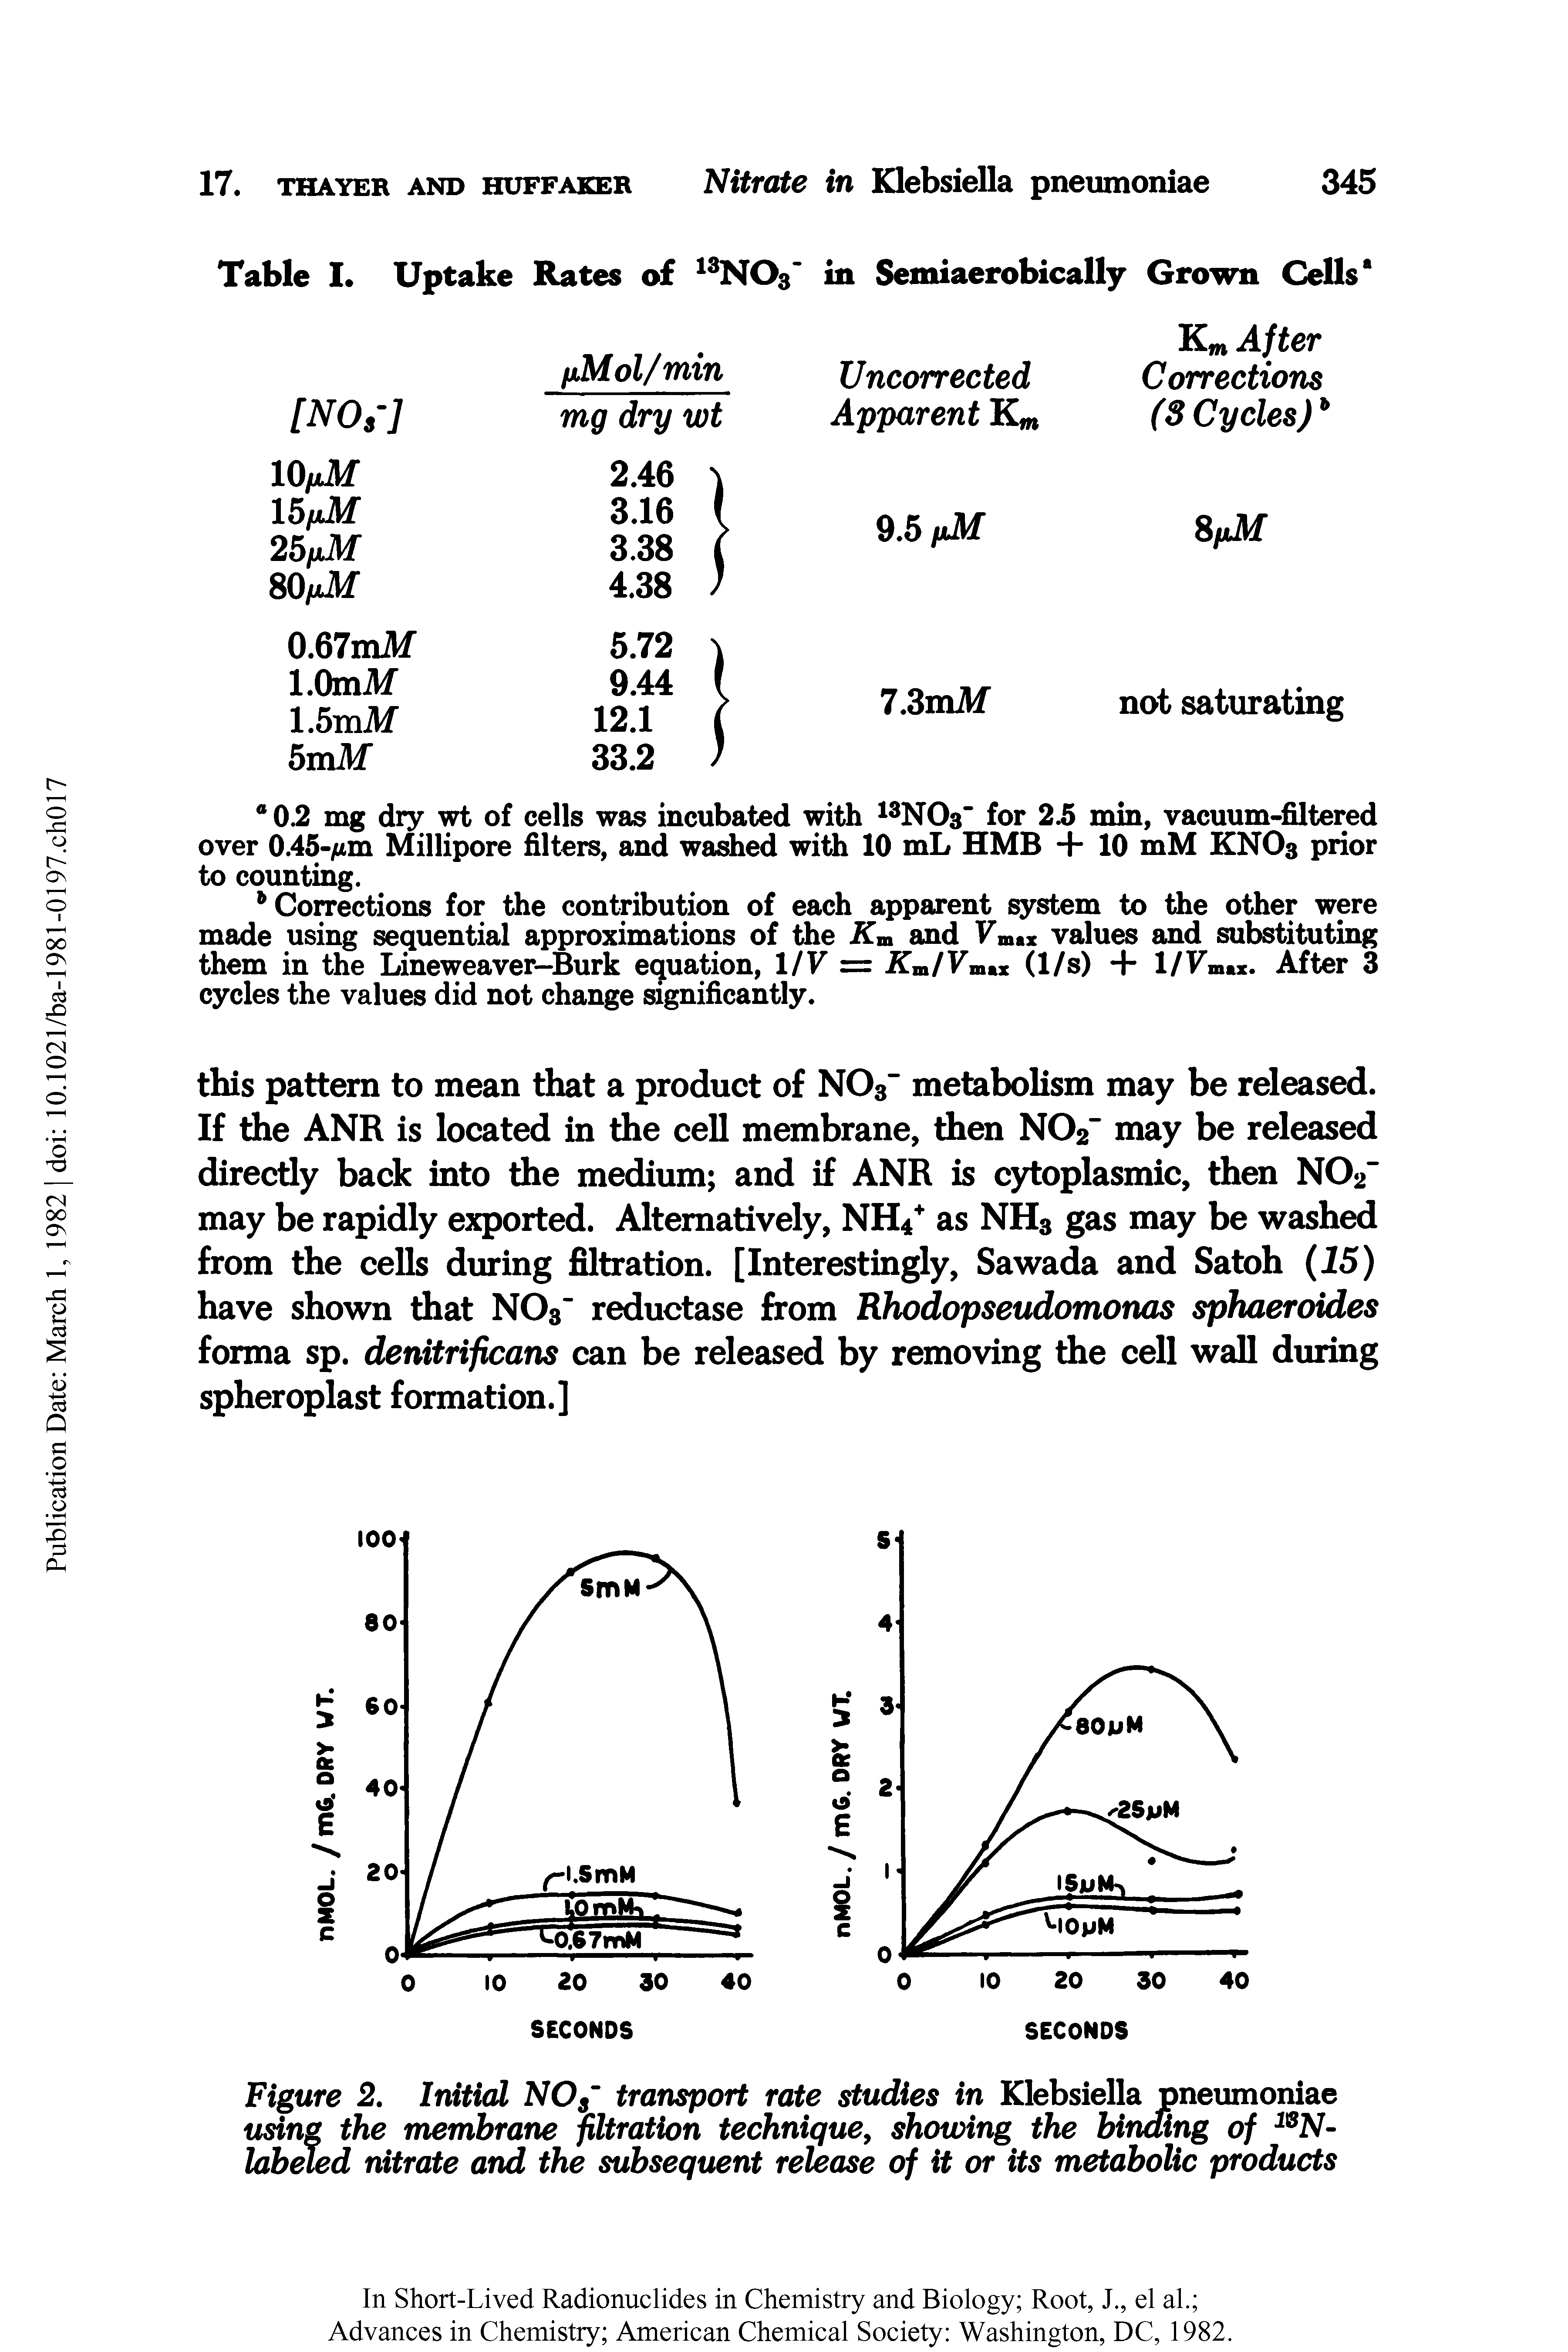 Figure 2, Initial NO," transport rate studies in Klebsiella pneumoniae using the membrane filtration technique, showing the binding of N-labeTed nitrate and the subsequent release of it or its metabolic products...